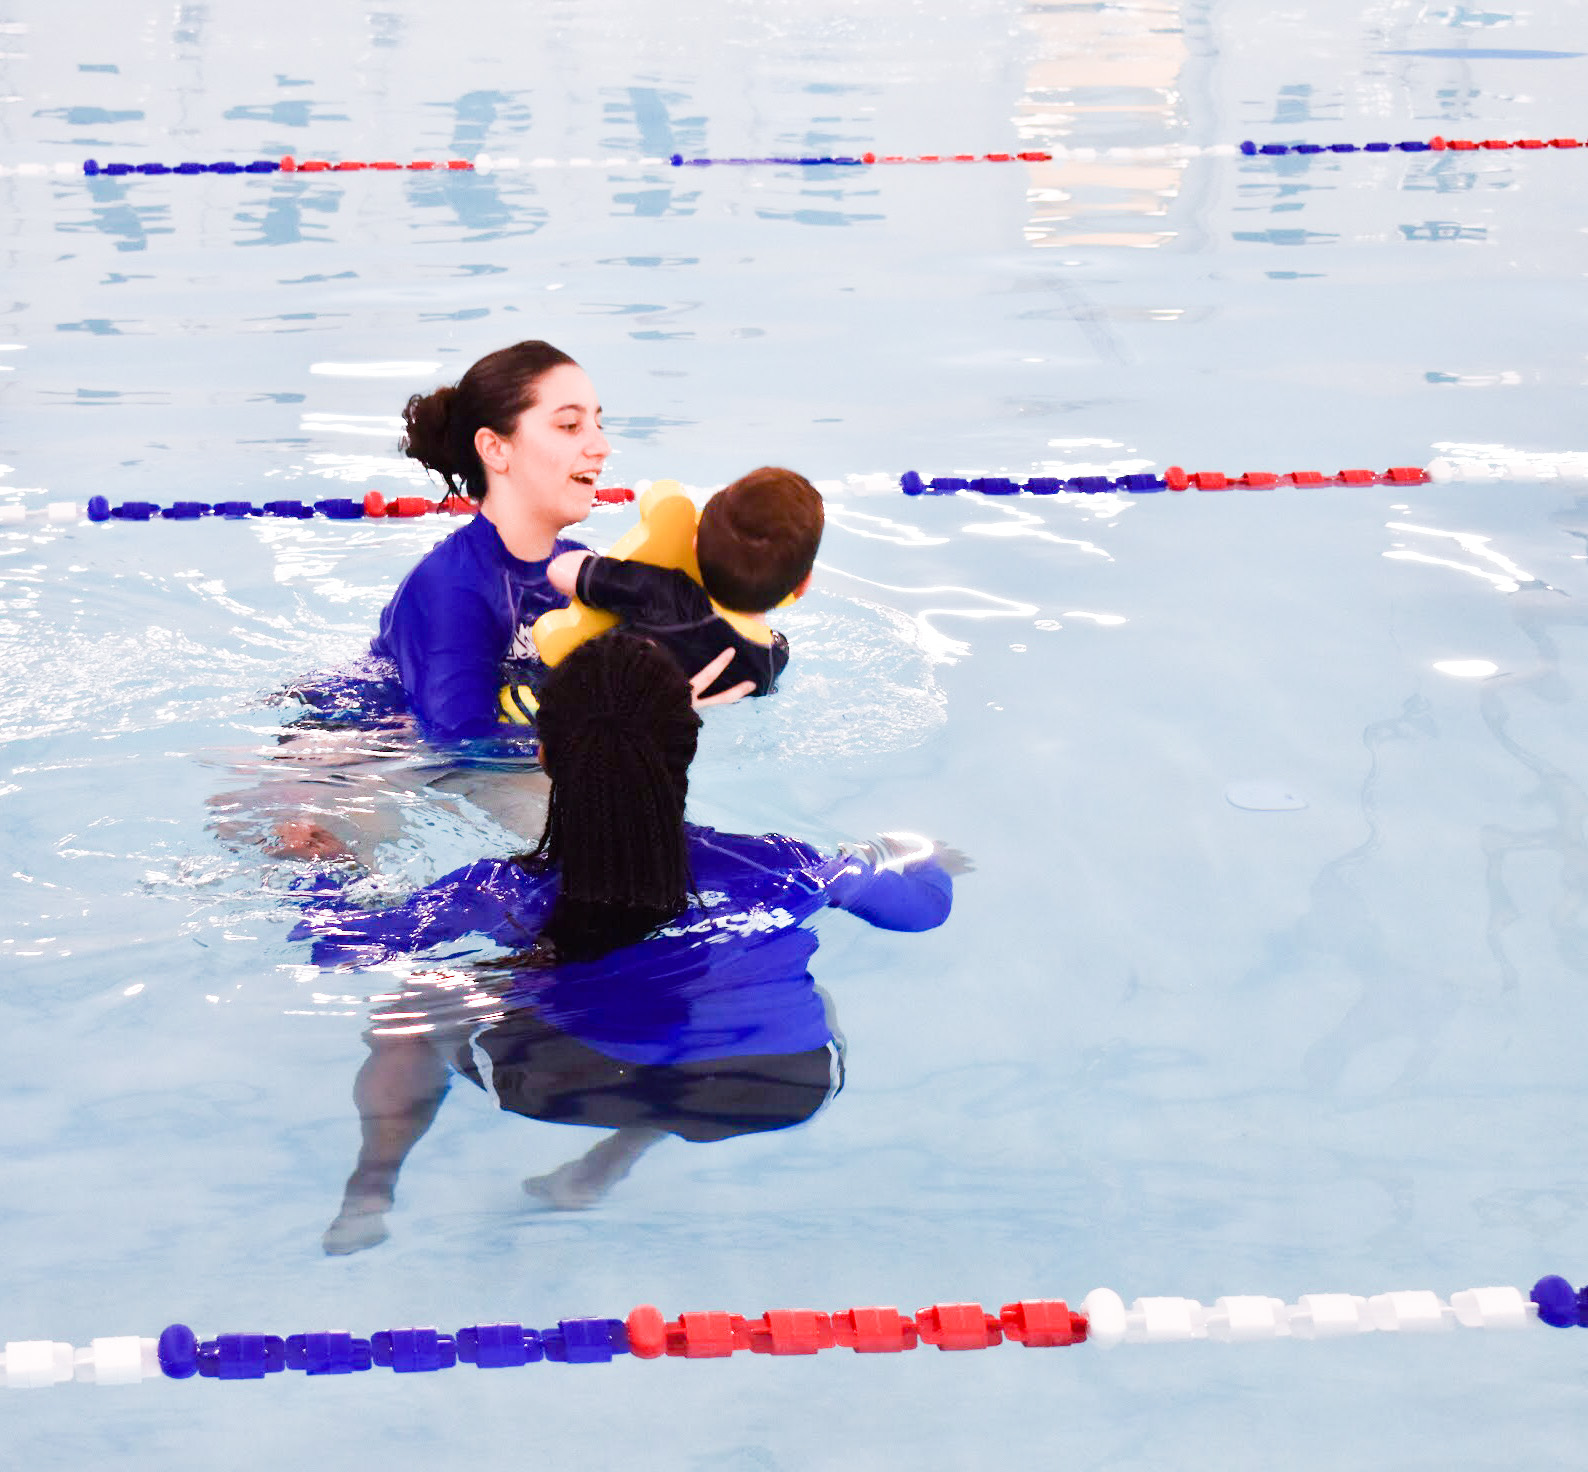 What to Expect at Baby Swim Lessons: Prepare yourself and your child for their first swim lesson with these tips! My infant and preschooler take lessons at Aqua-Tots Swim School in Olathe, KS. Here's what I learned from the pros about baby swim lessons and getting kids acclimated to the water!